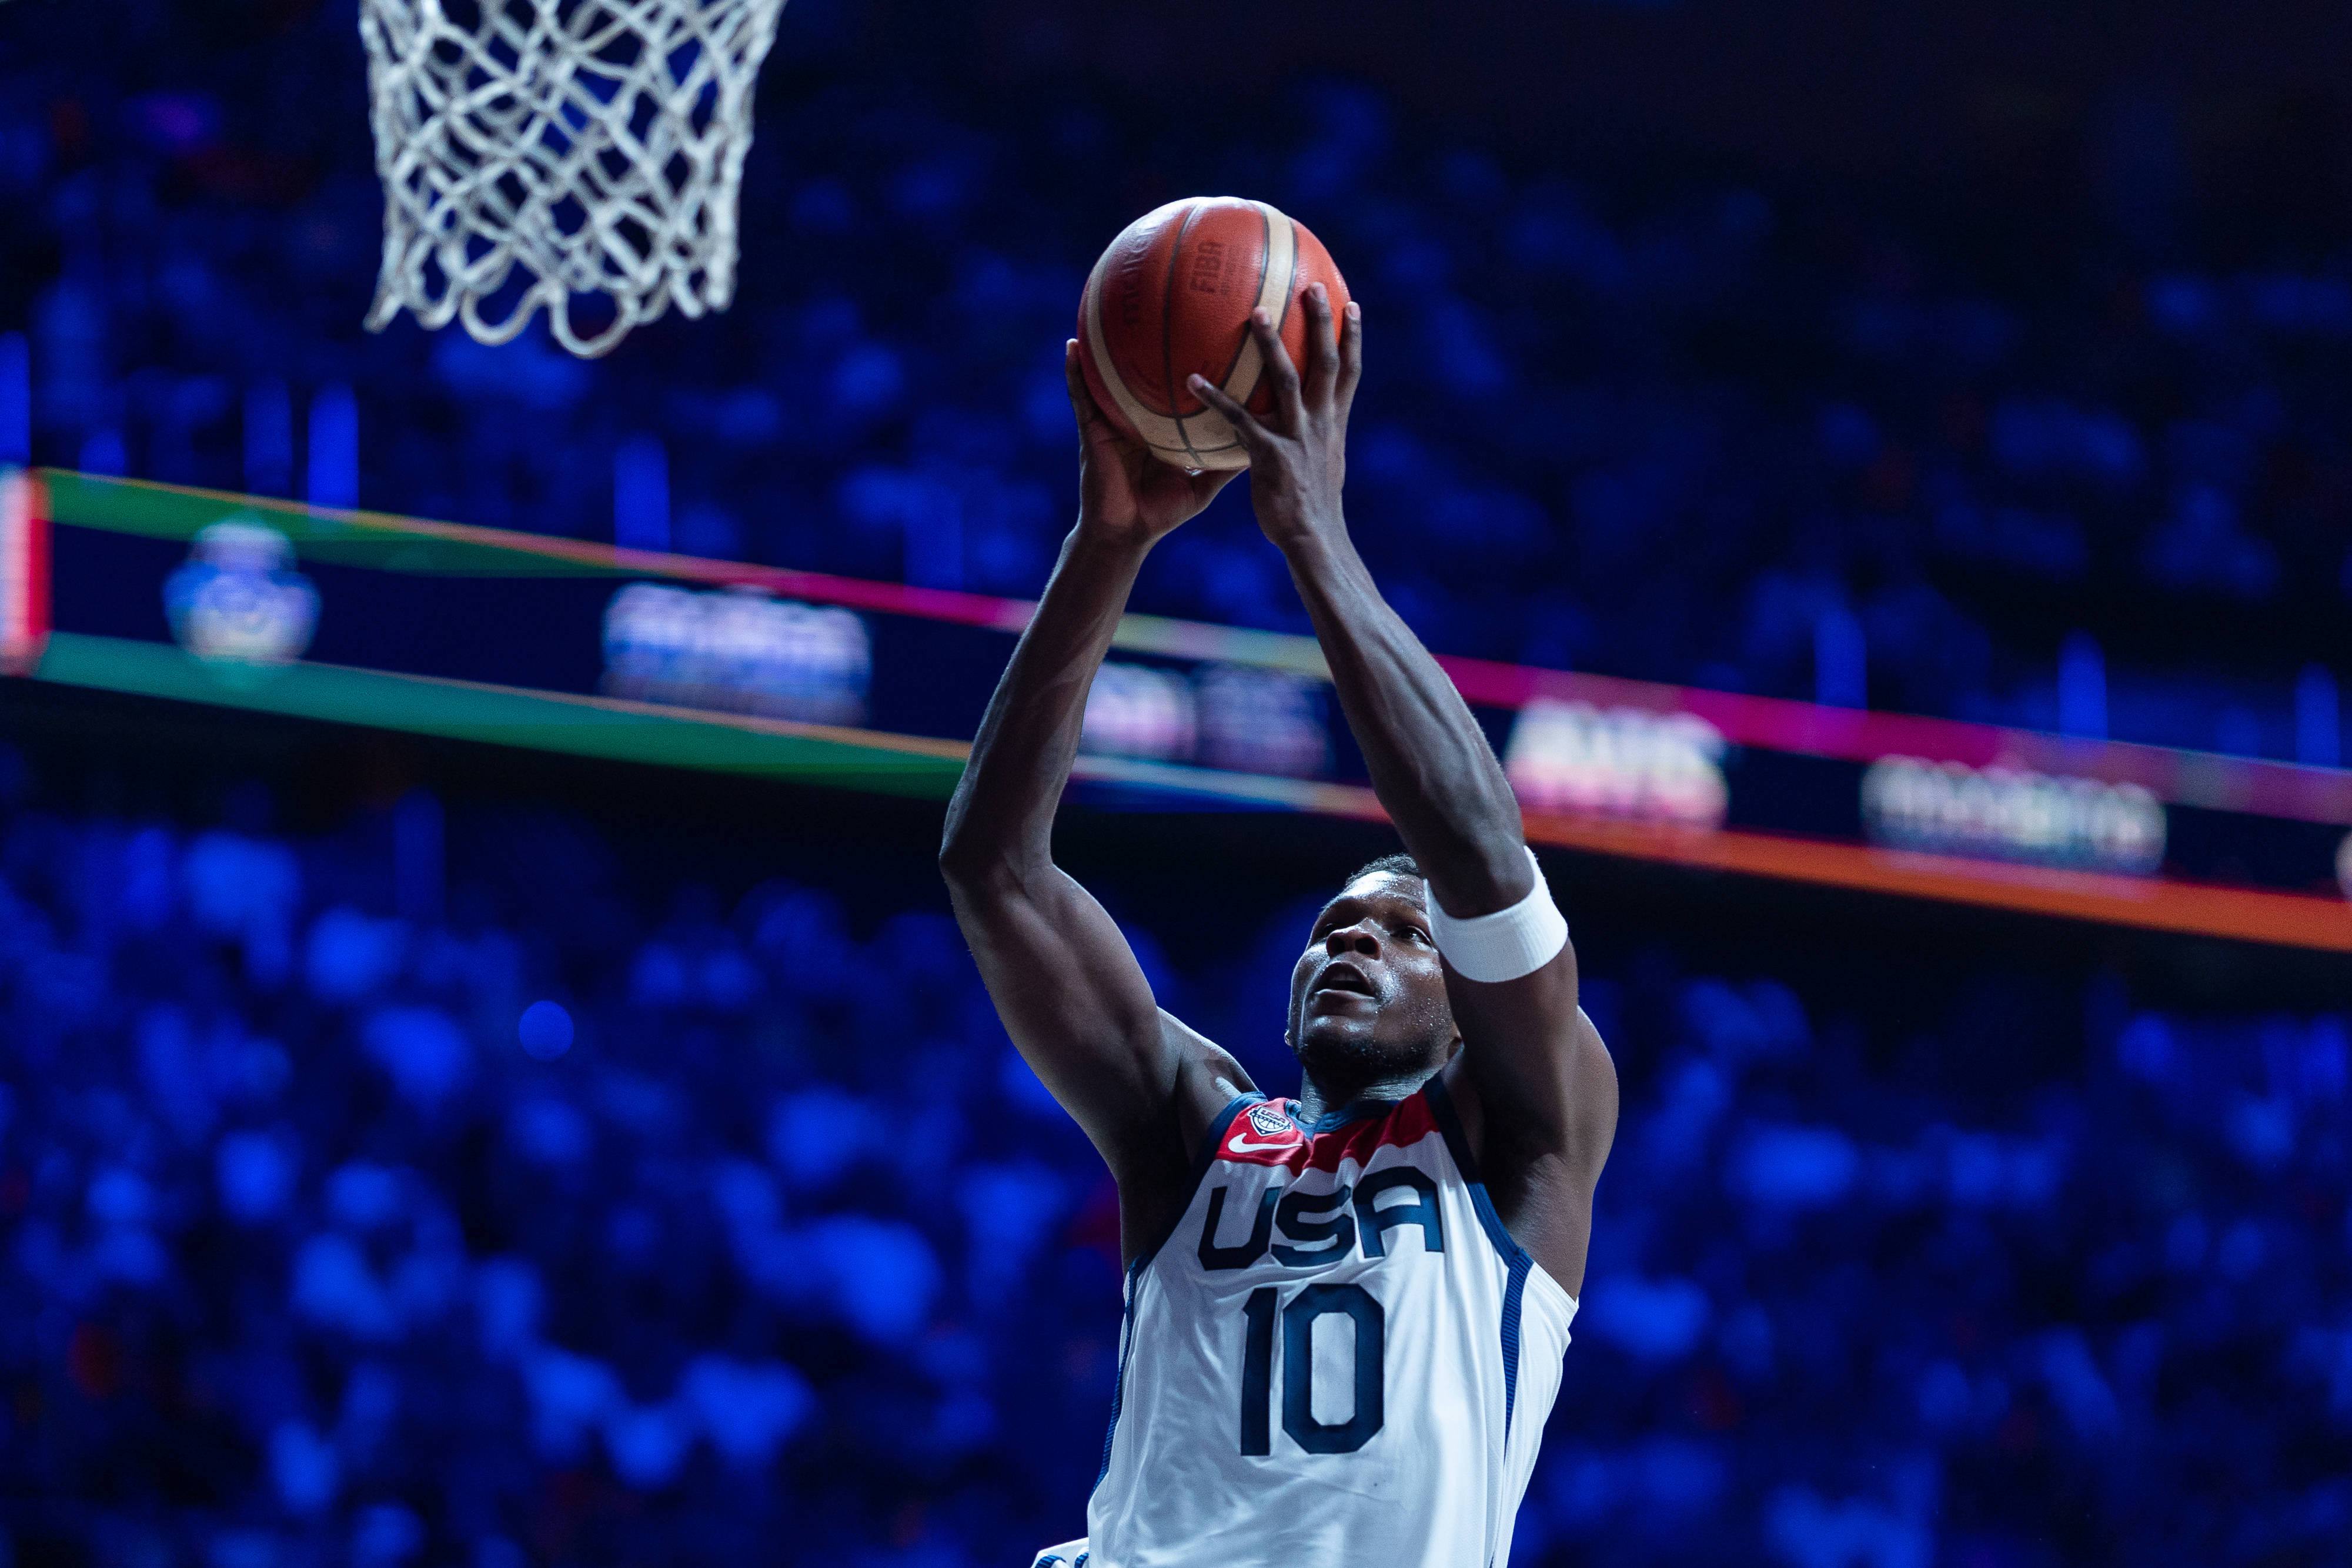 USA will open Basketball World Cup against New Zealand